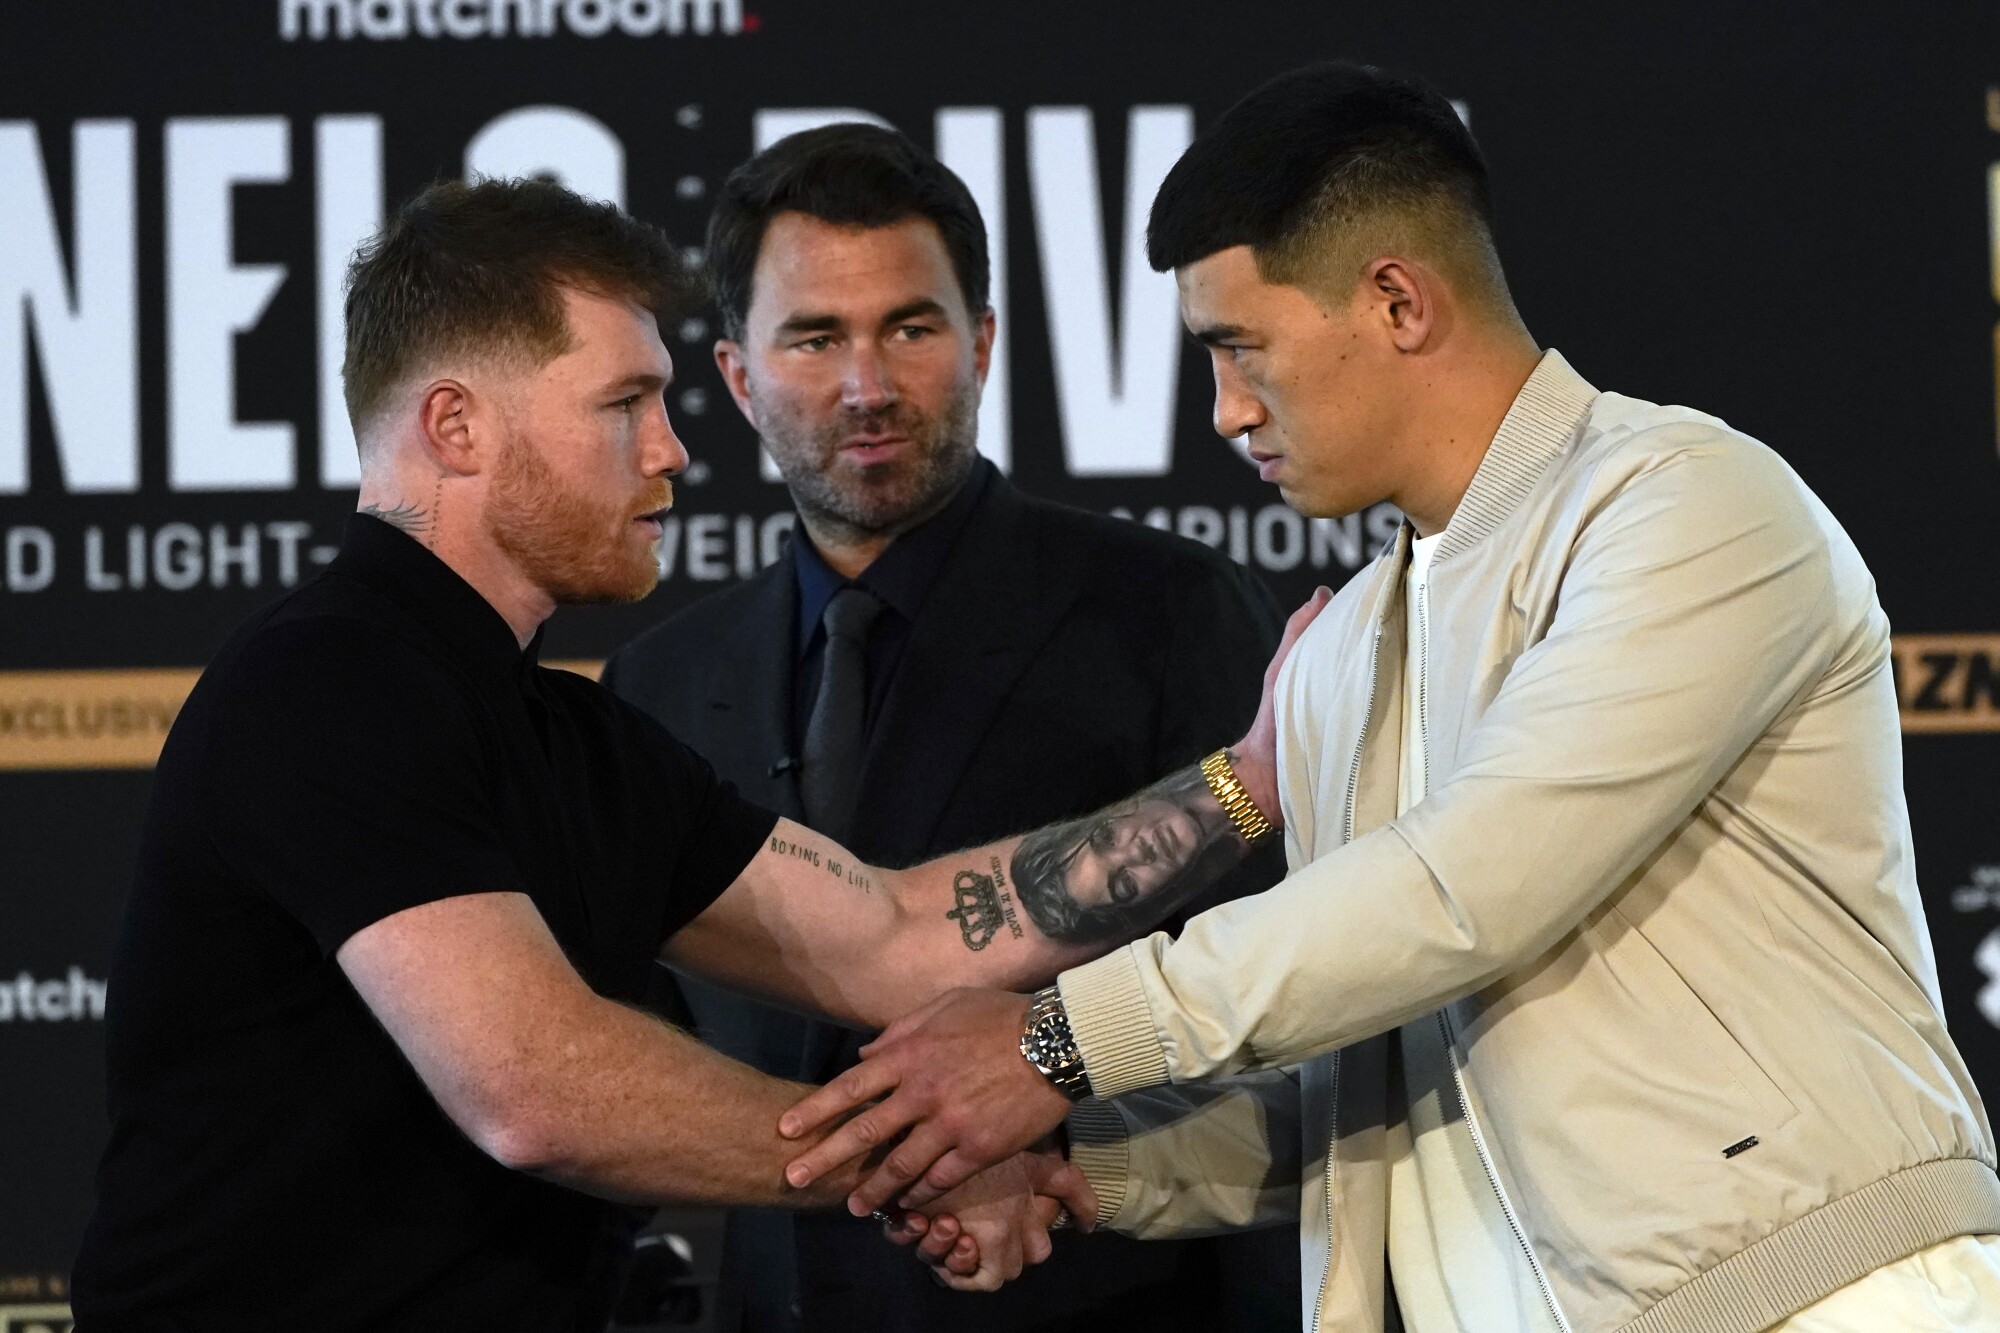 Canelo Álvarez, left, shakes hands with boxer Dmitry Bivol as promoter Eddie Hearn watches during a weigh-in